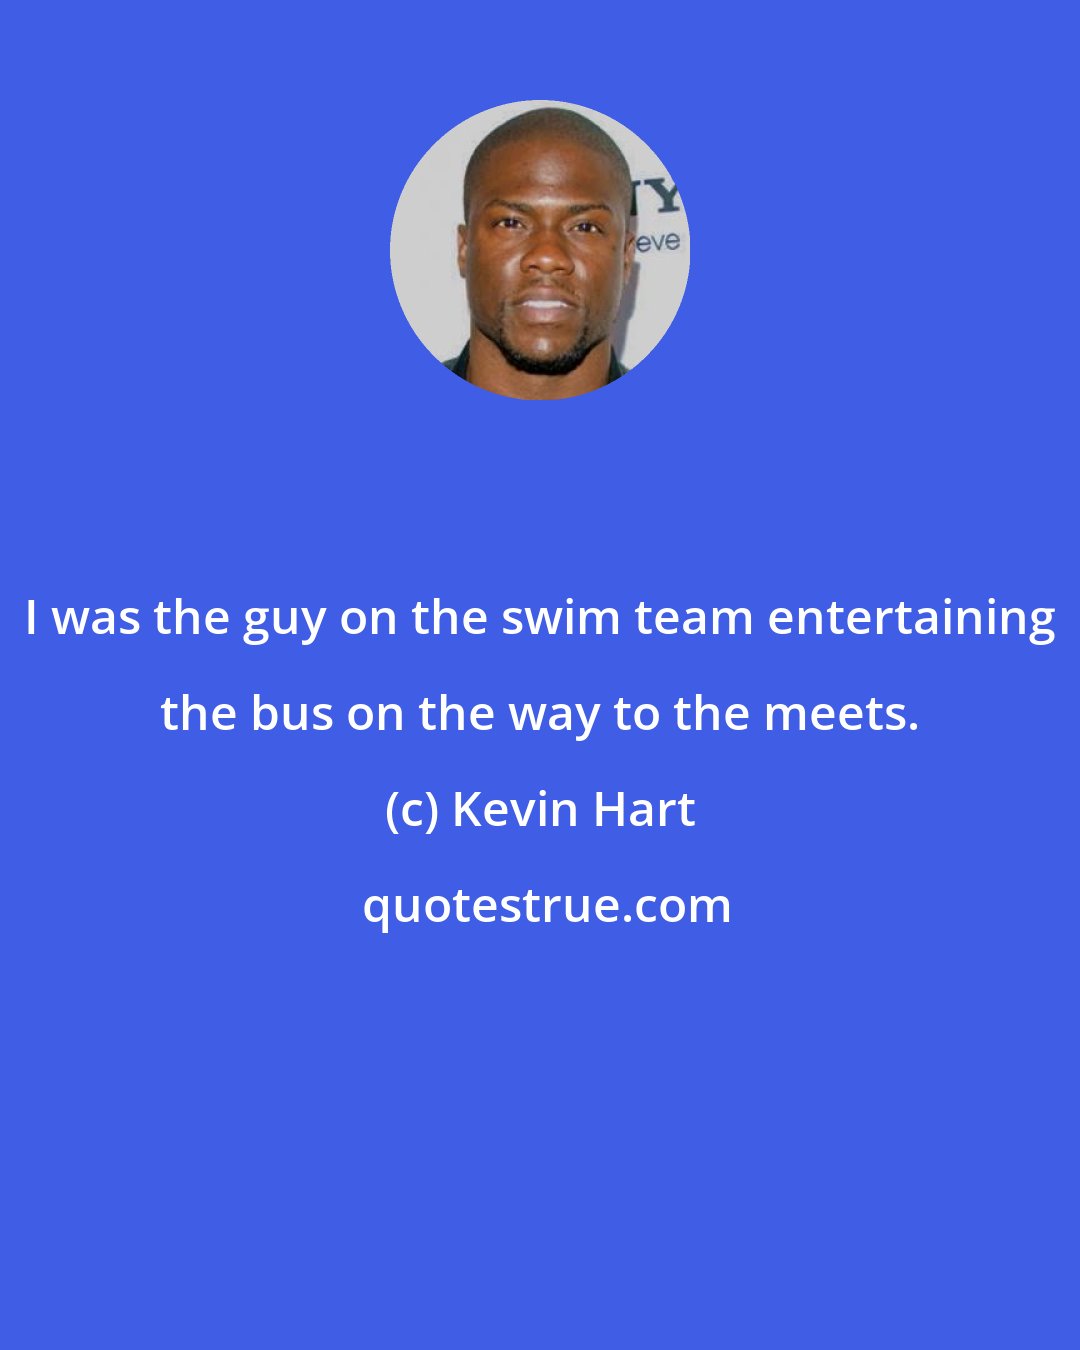 Kevin Hart: I was the guy on the swim team entertaining the bus on the way to the meets.